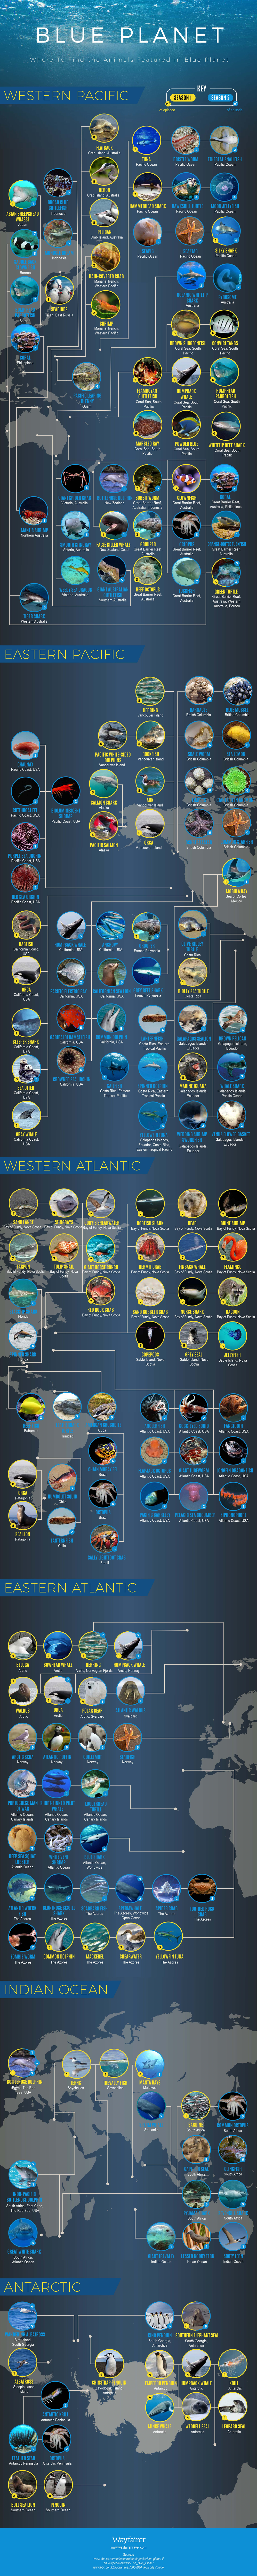 Inforgraphic of blue planet filming locations